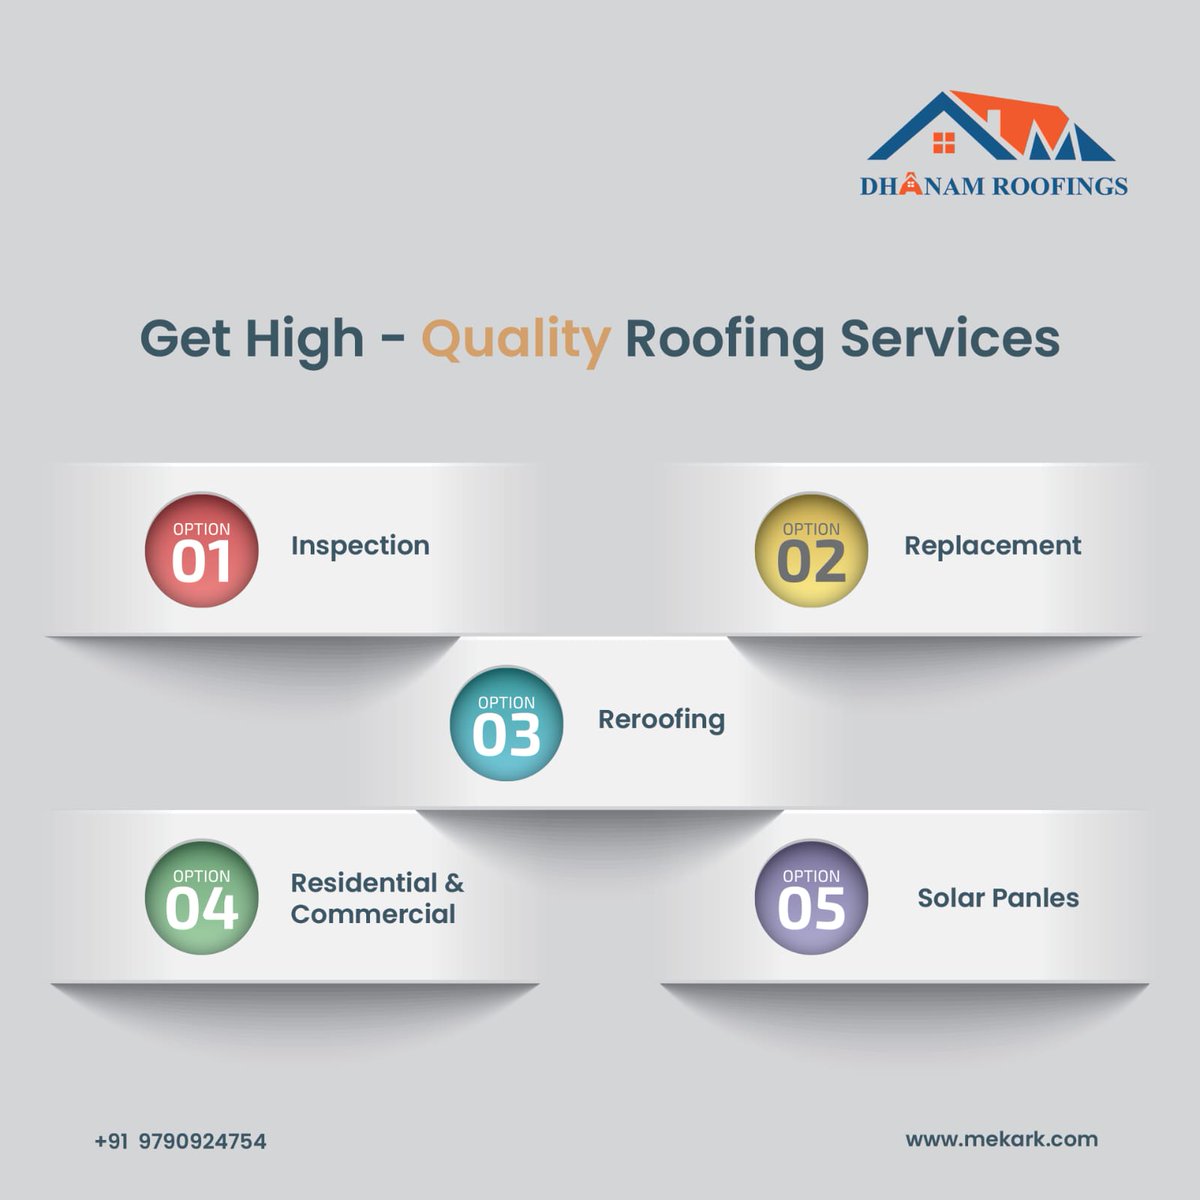 Quality Roofing Chennai - Dhanamroofings are your trusted experts in delivering best quality roofing solutions for residential and commercial 
buildings.

dhanamroofings.com
+91 9176100687

#roofingsystem #Dhanamroofingmanufacturer #Roofingmanufacturers #roofingcontractors